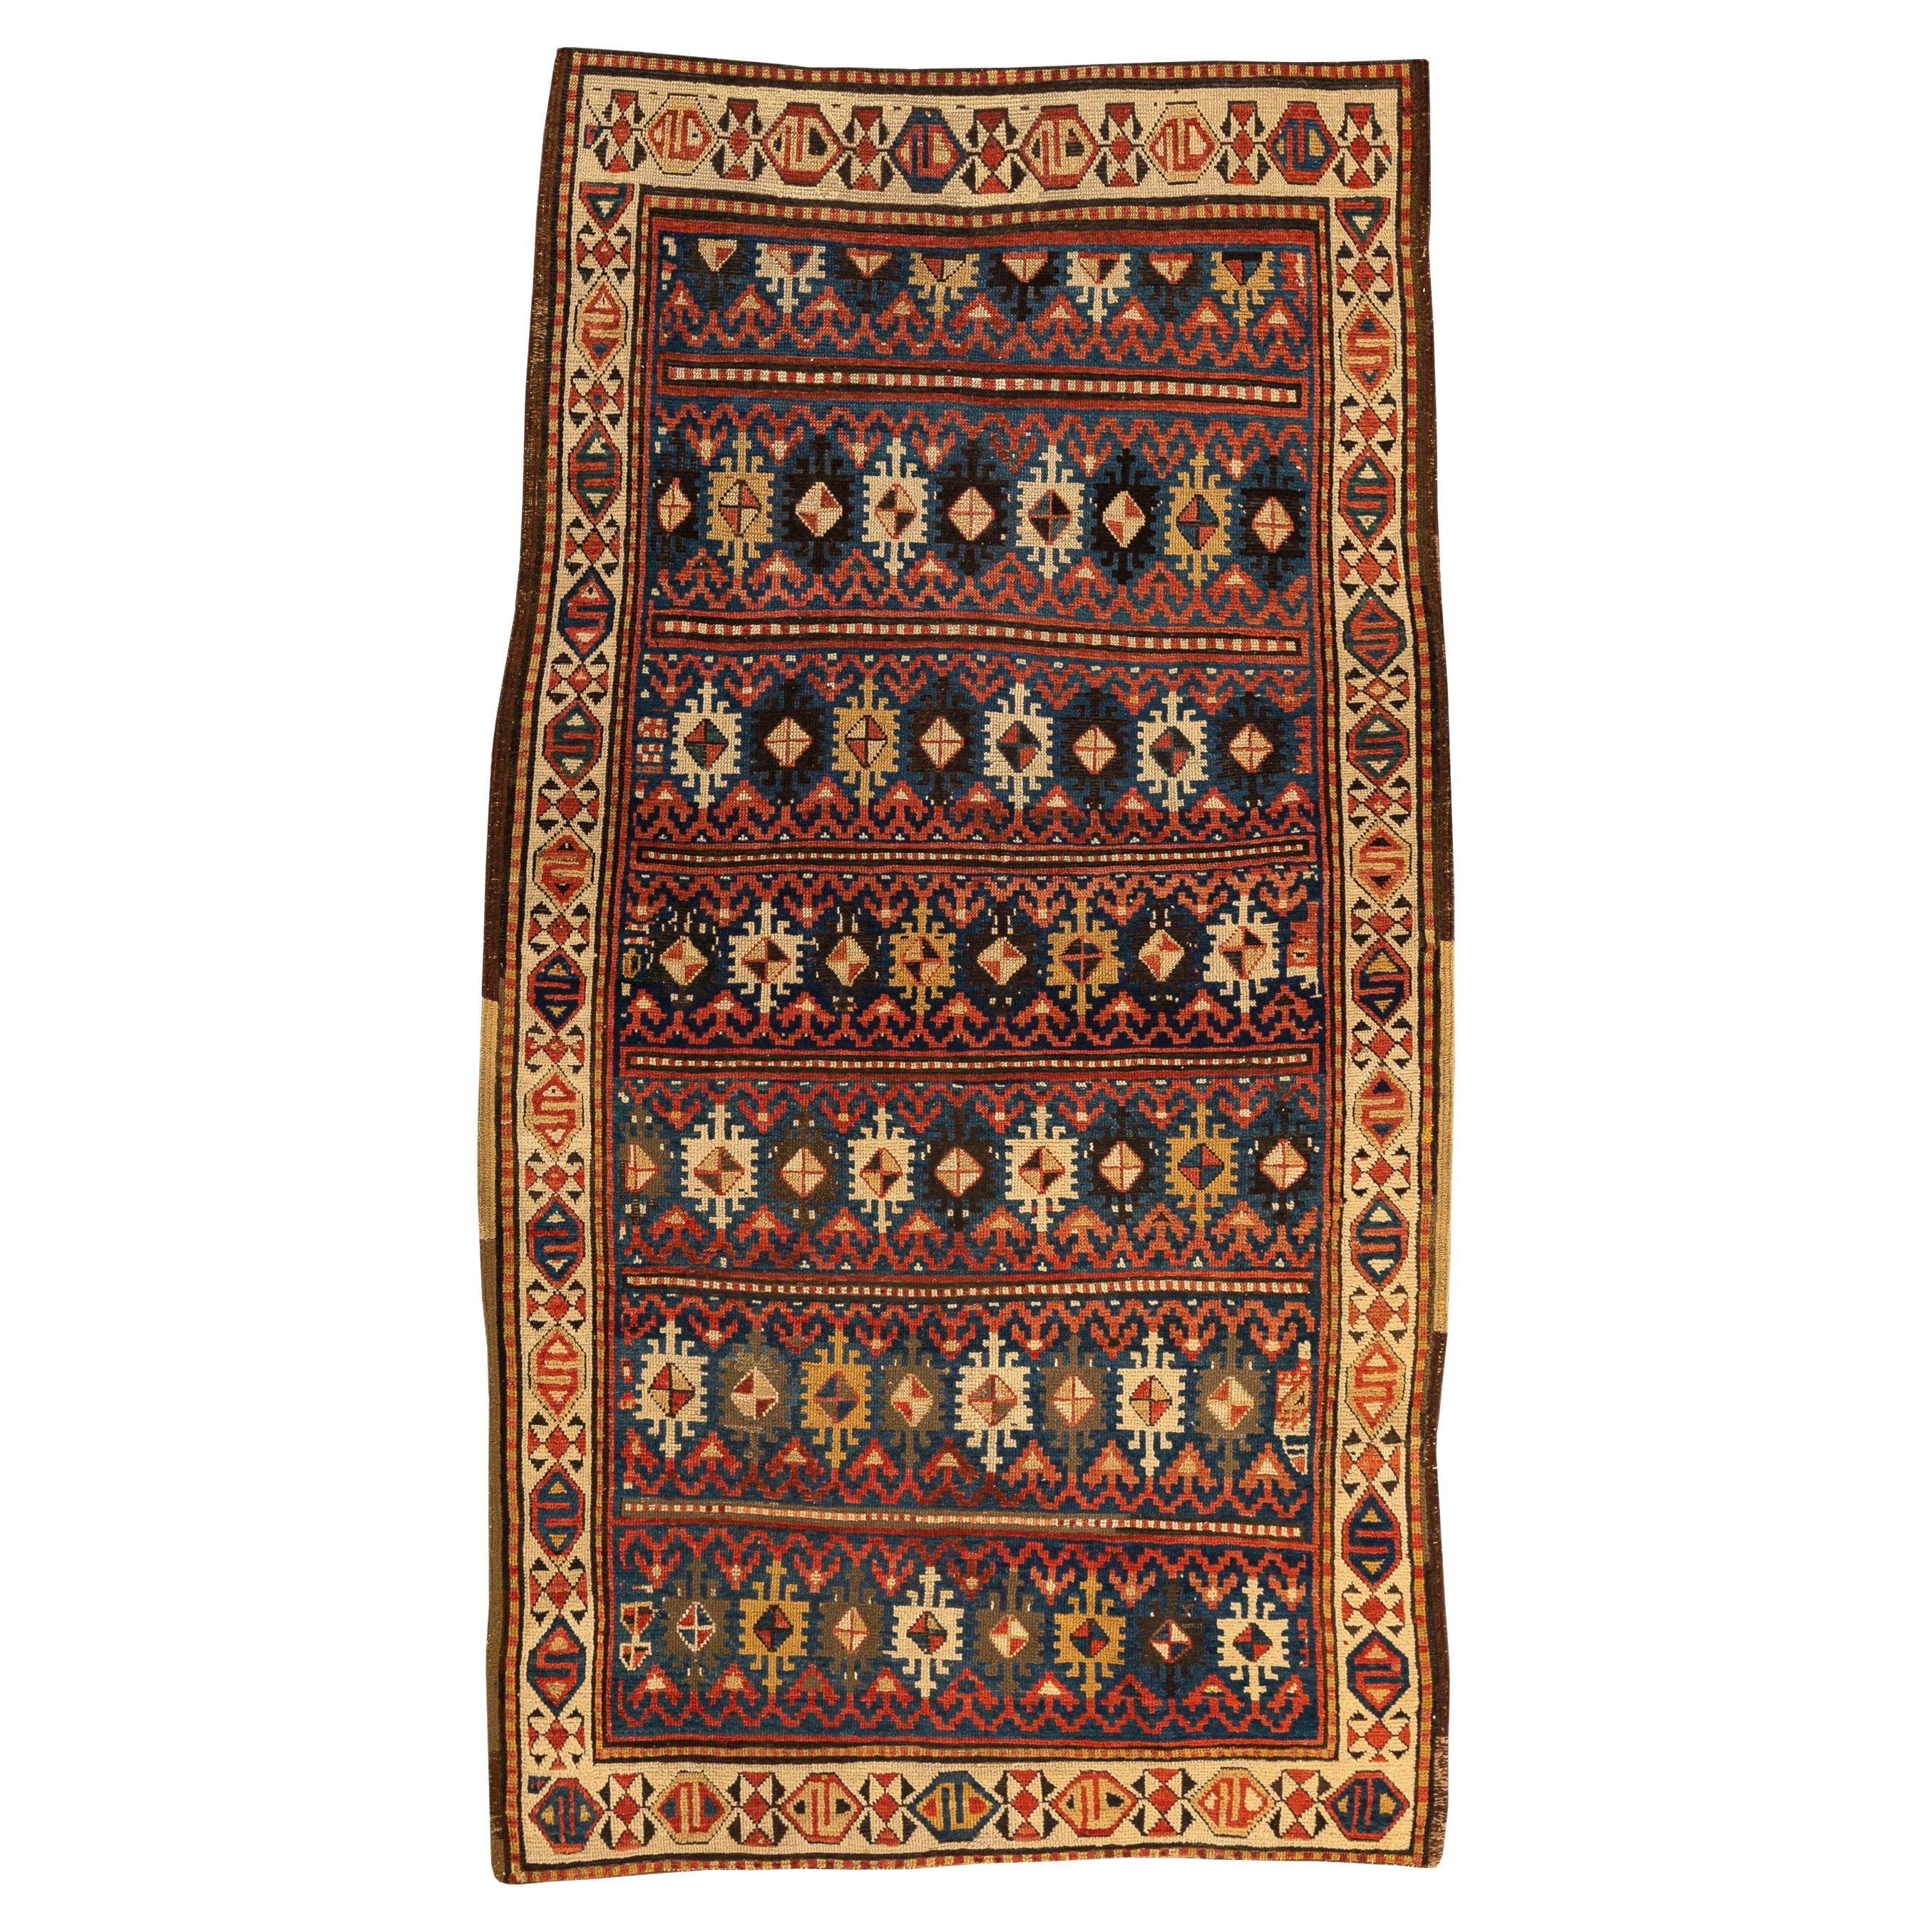 Armenian Kazak - Central Caucasus
This is a unique rug, different from the classic Caucasian ones. It contains seven rows with colourful geometric figures formed by serrated squares with diamonds in their centre. Rows of red arrows support these